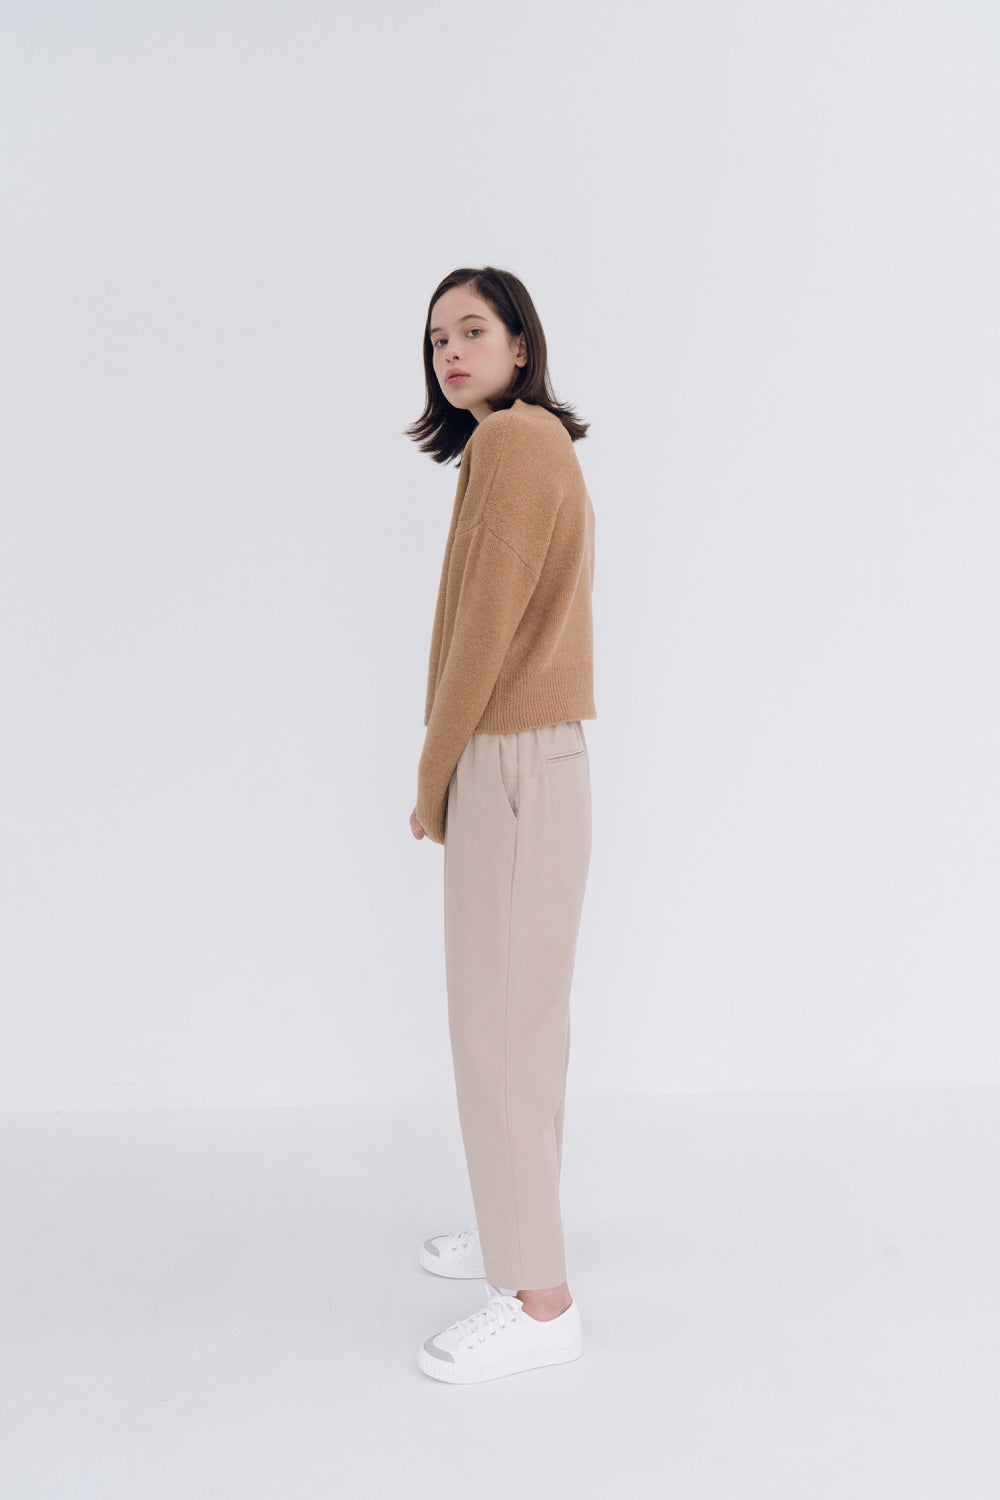 NOTA Relax Banding Pants Beige Modest Loose-Fitting Women's Trousers With Elastic Waistband, Ankle-Length Cut, Four Pockets